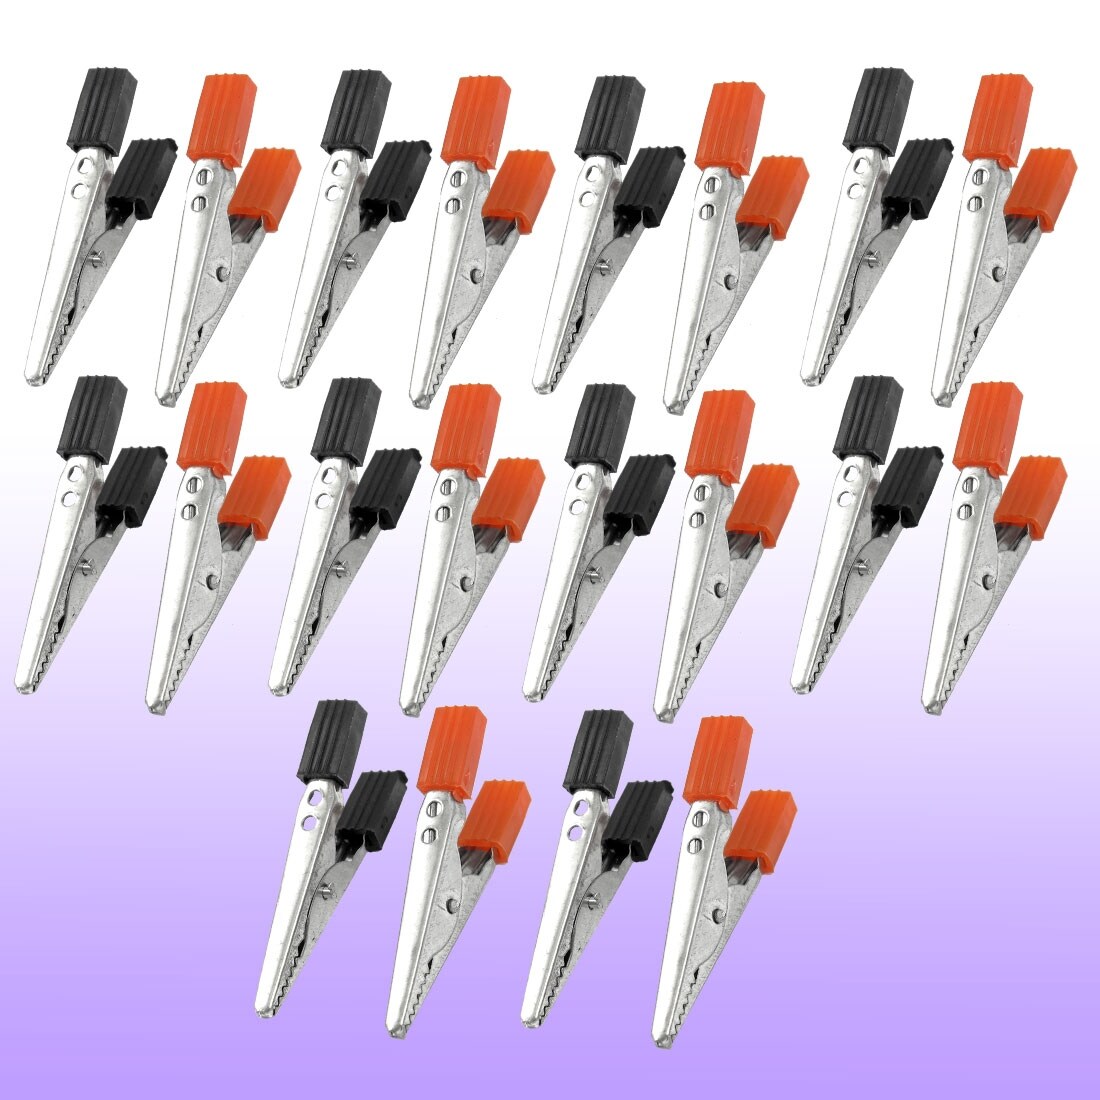 20 Pcs Insulated Alligator Clips Test Clamp Crocodile Clamps 1.9" - Red, Black, Silver Tone